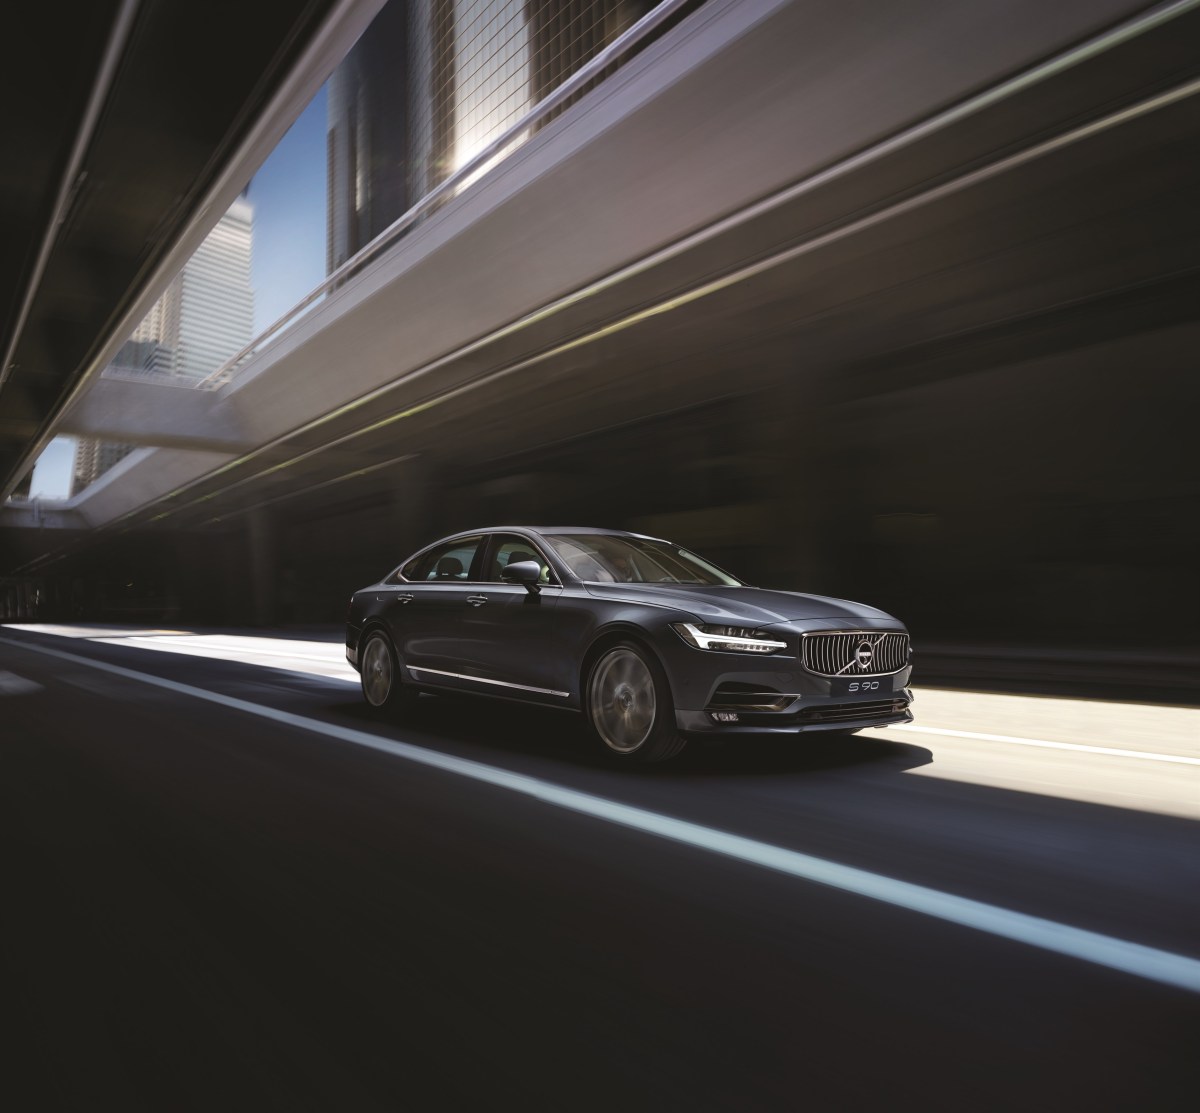 The Volvo S90, a used luxury car that is better than the Jaguar XF